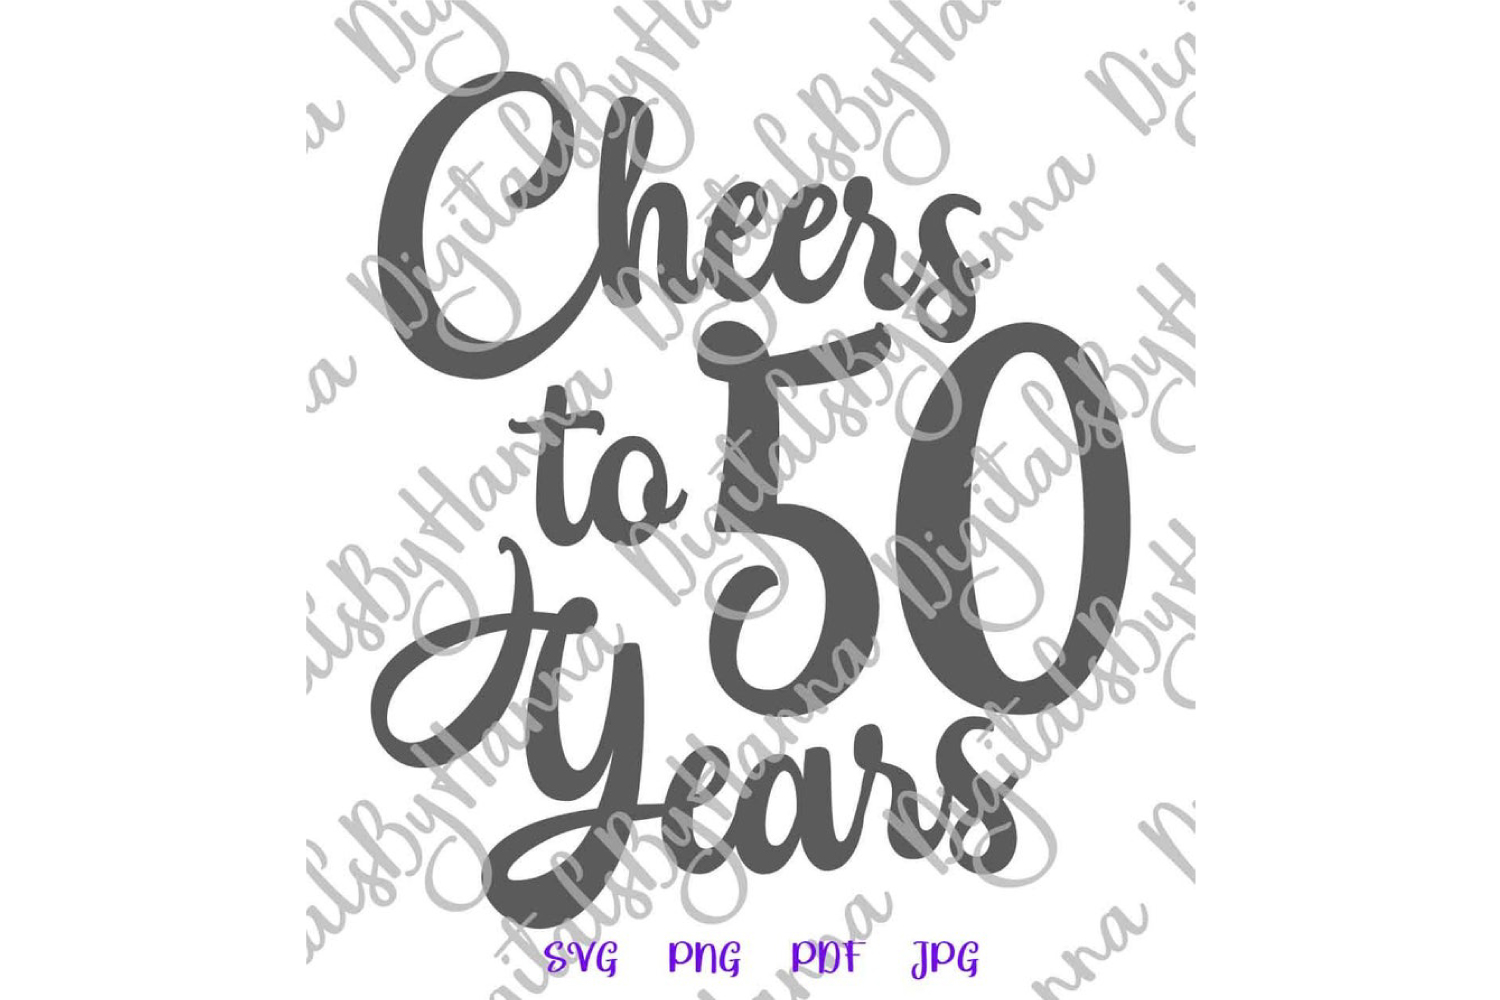 Download 50th Birthday SVG for Cricut Cheers to 50 Years Cut File ...